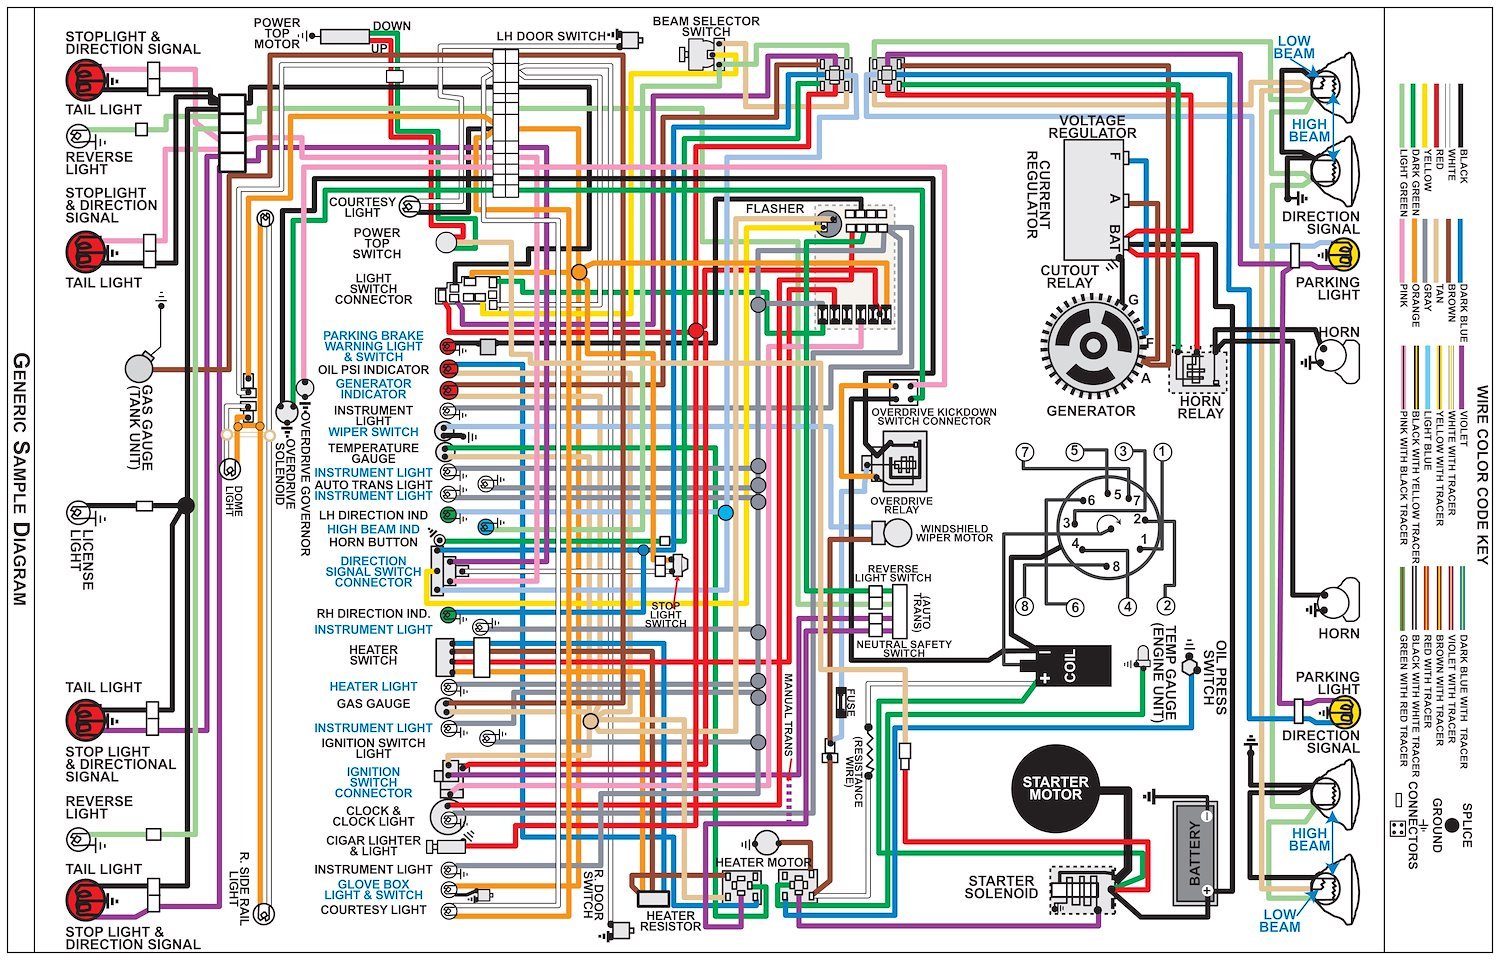 Wiring Diagram for 1971 Dodge Challenger with HEMI